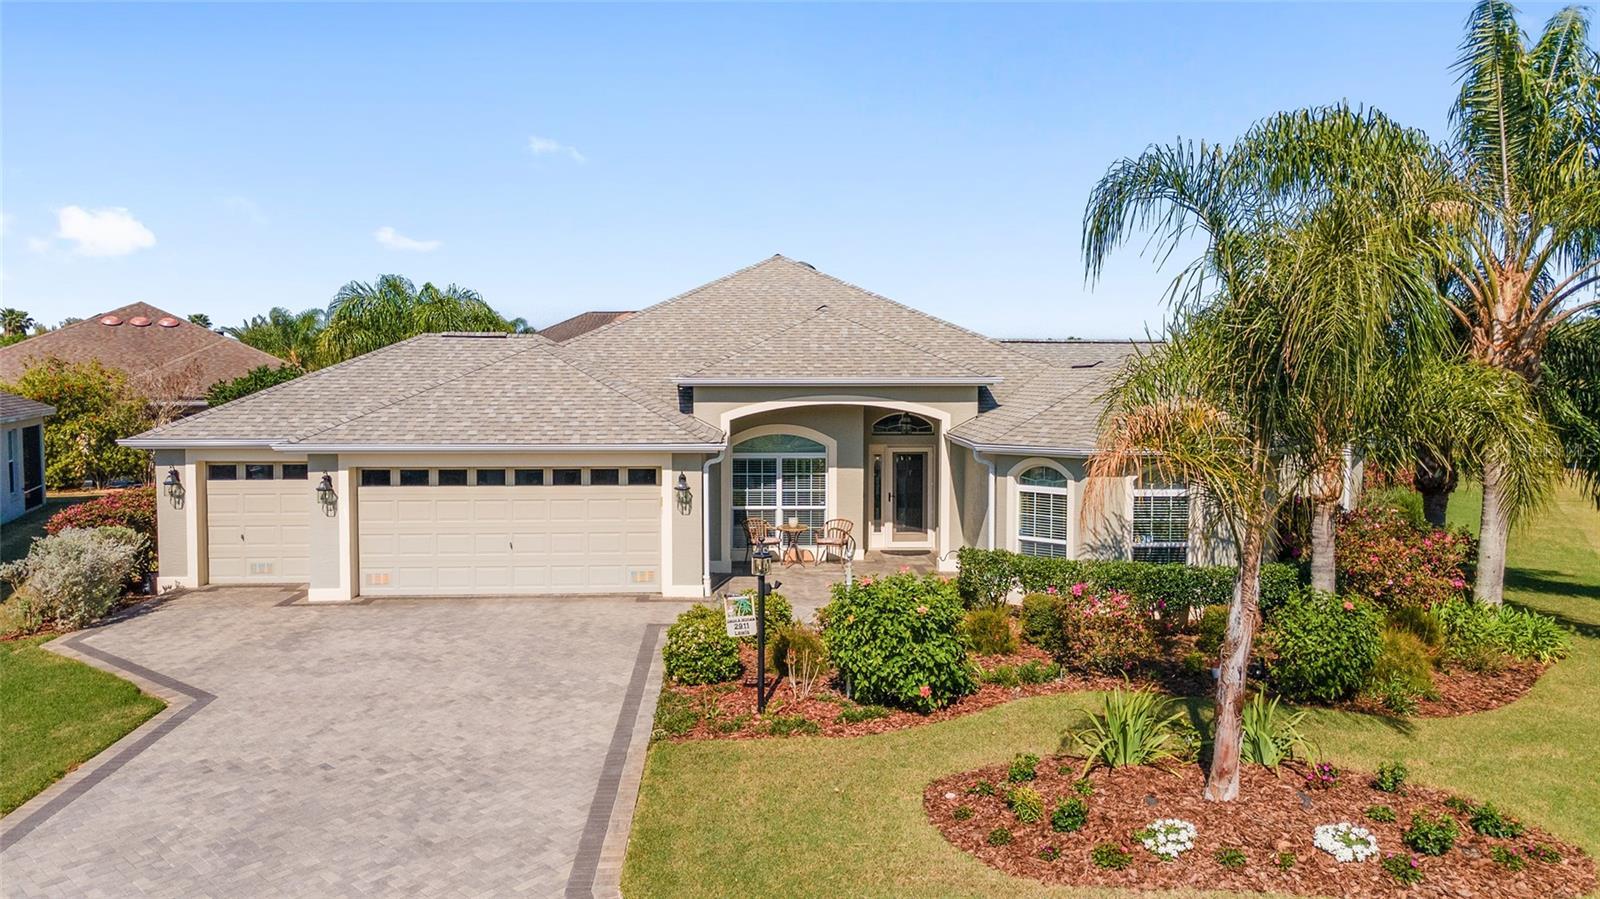 Photo one of 2911 Rain Lily Loop The Villages FL 32163 | MLS G5079437